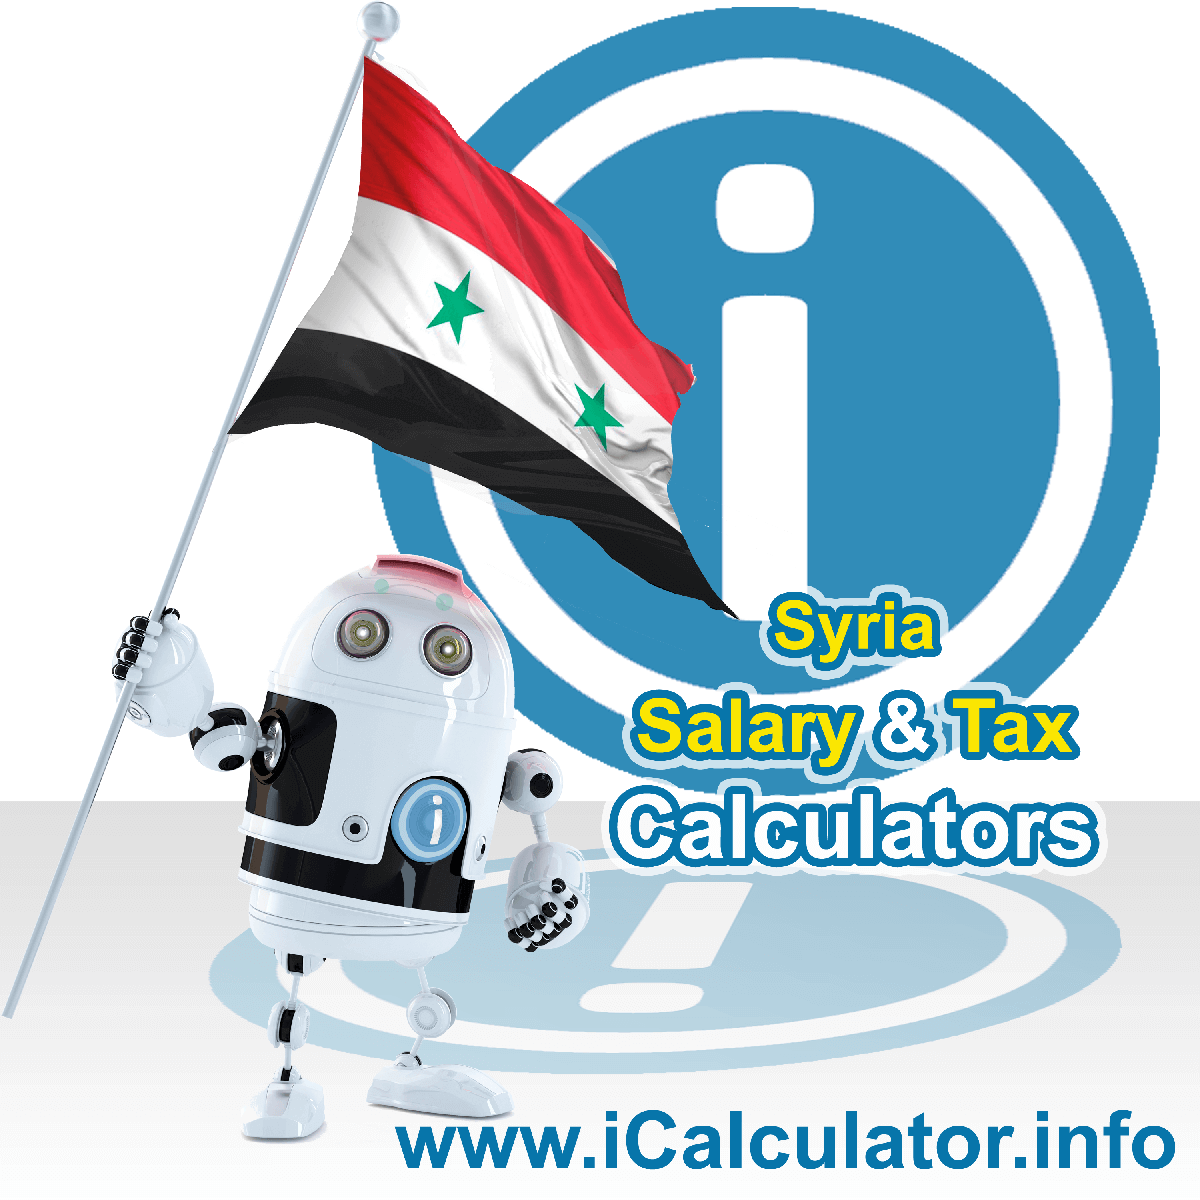 Syria Salary Calculator. This image shows the Syriaese flag and information relating to the tax formula for the Syria Tax Calculator